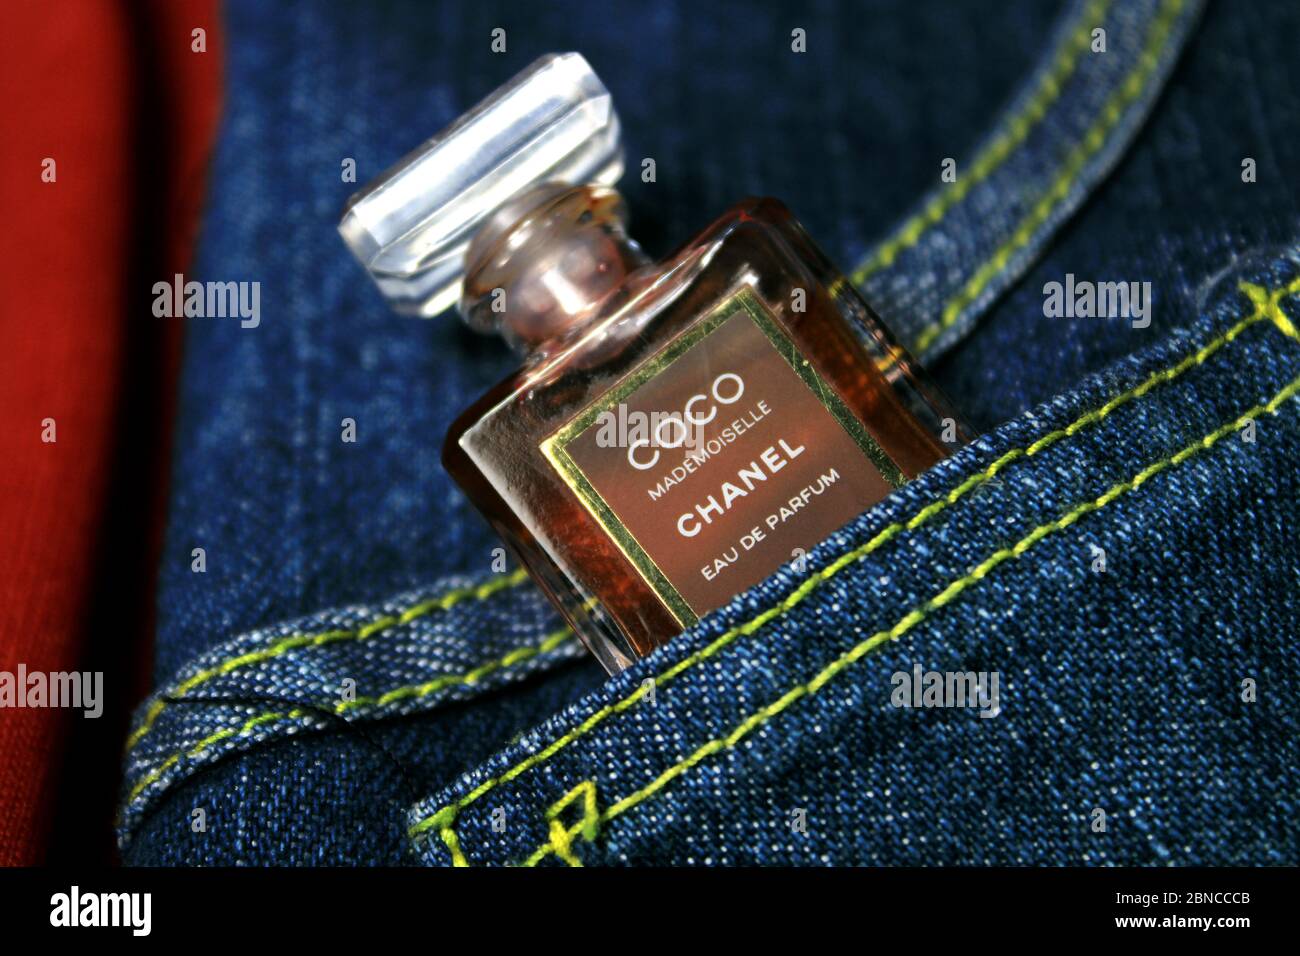 Perfume Bottle Flat Lay With Fragrance Ingredients Top View Stock